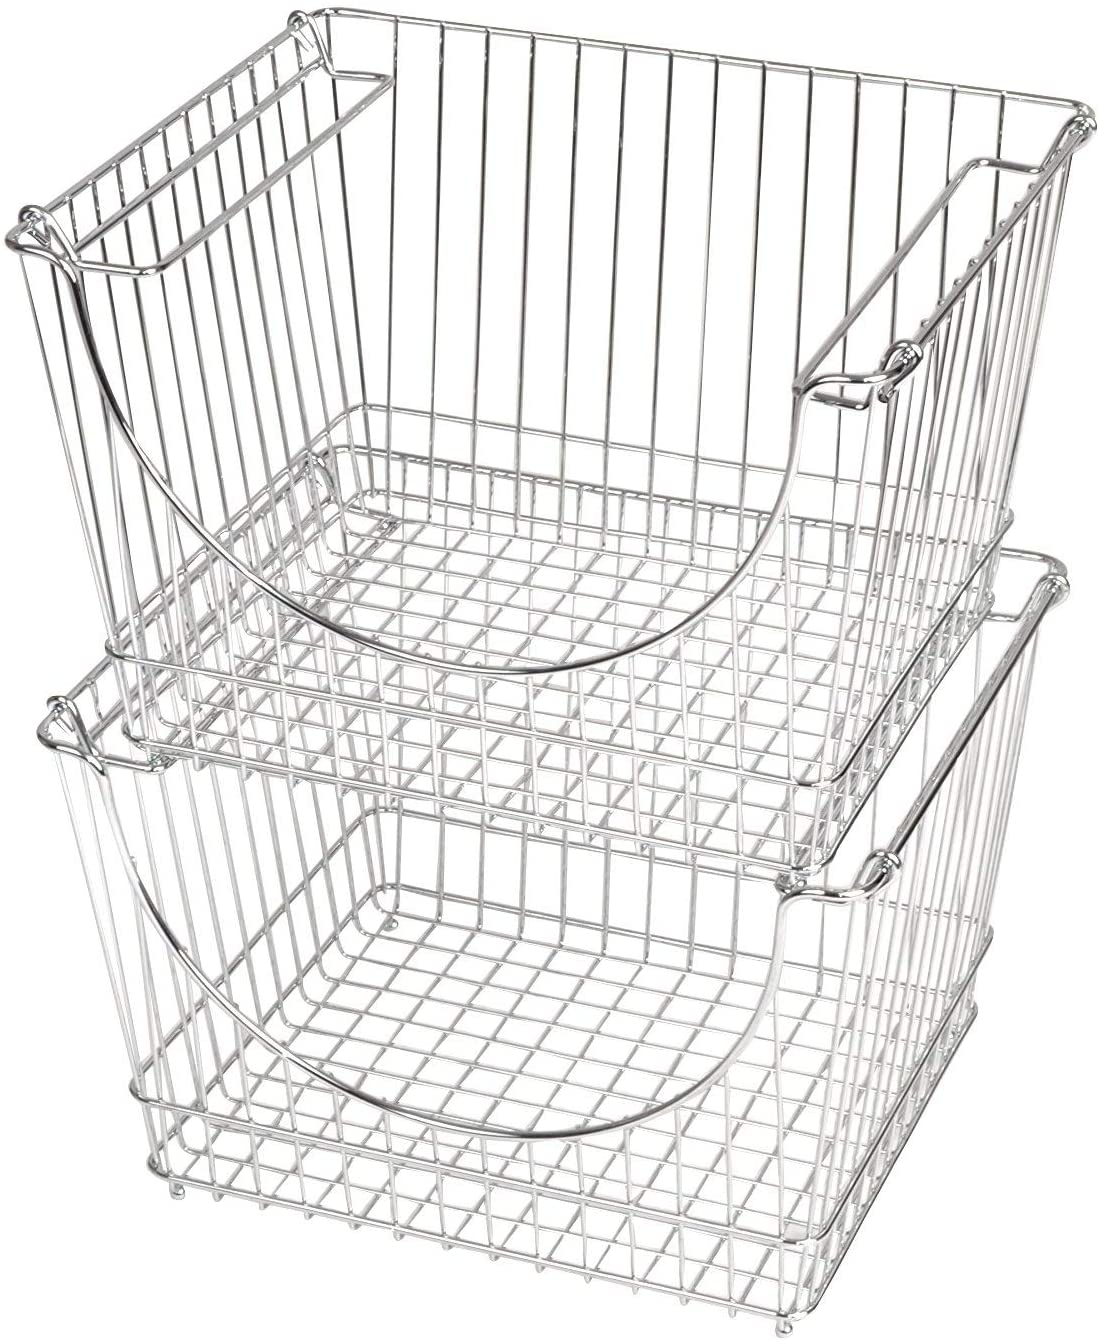 Large Metal Wire Stacking Baskets with Handles - Smart Design® 4